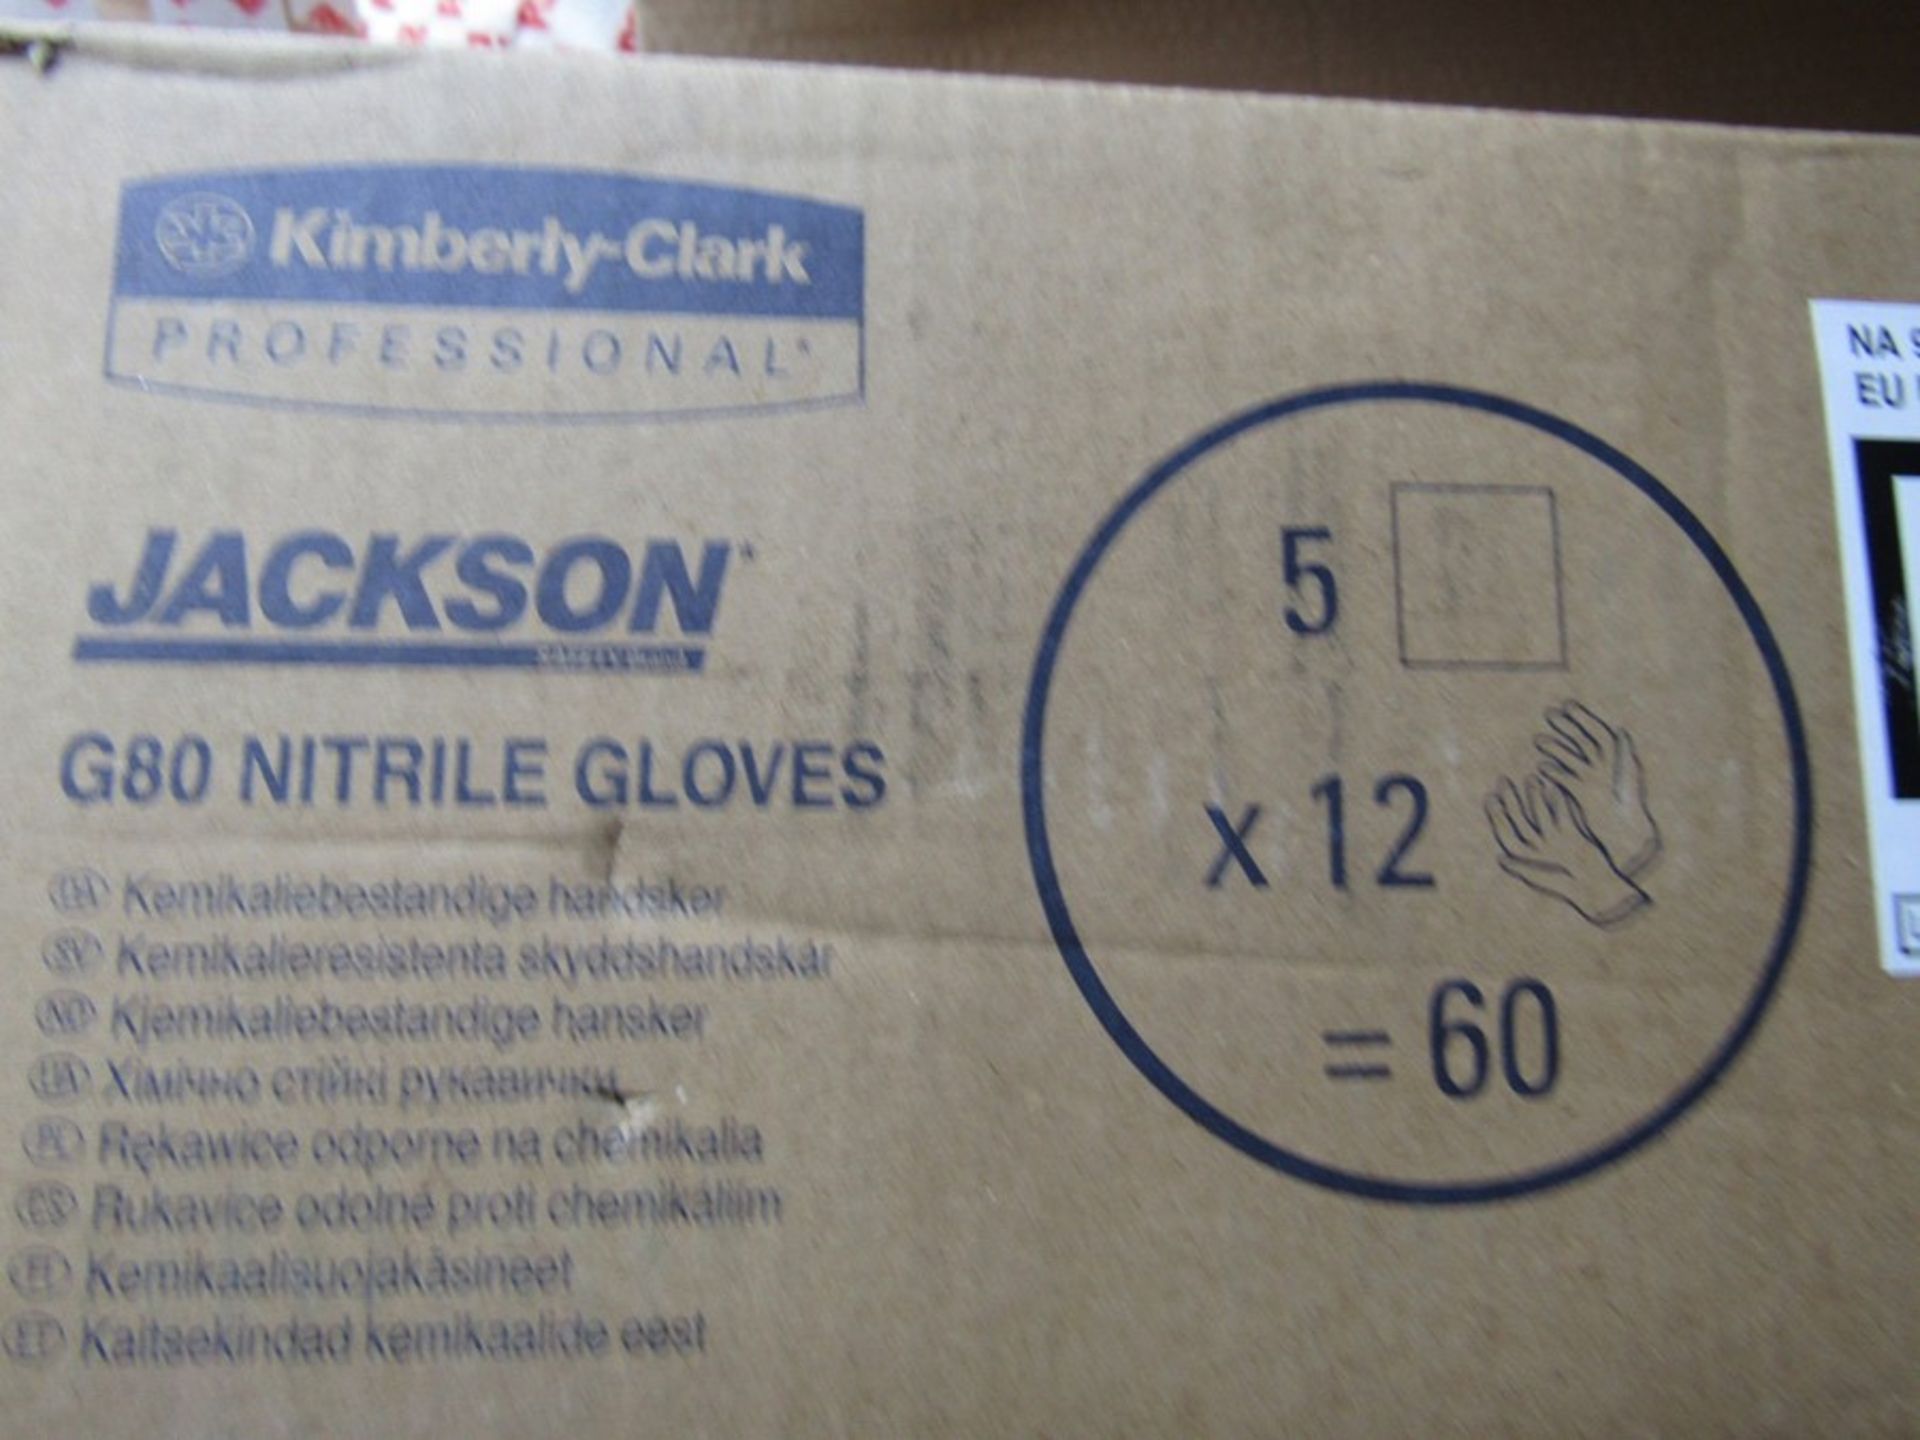 BOX of 60 Pairs Jackson G80 Nitrile Glove / Gauntlets Green Size 11/12 XXL - 89077 - Image 3 of 3